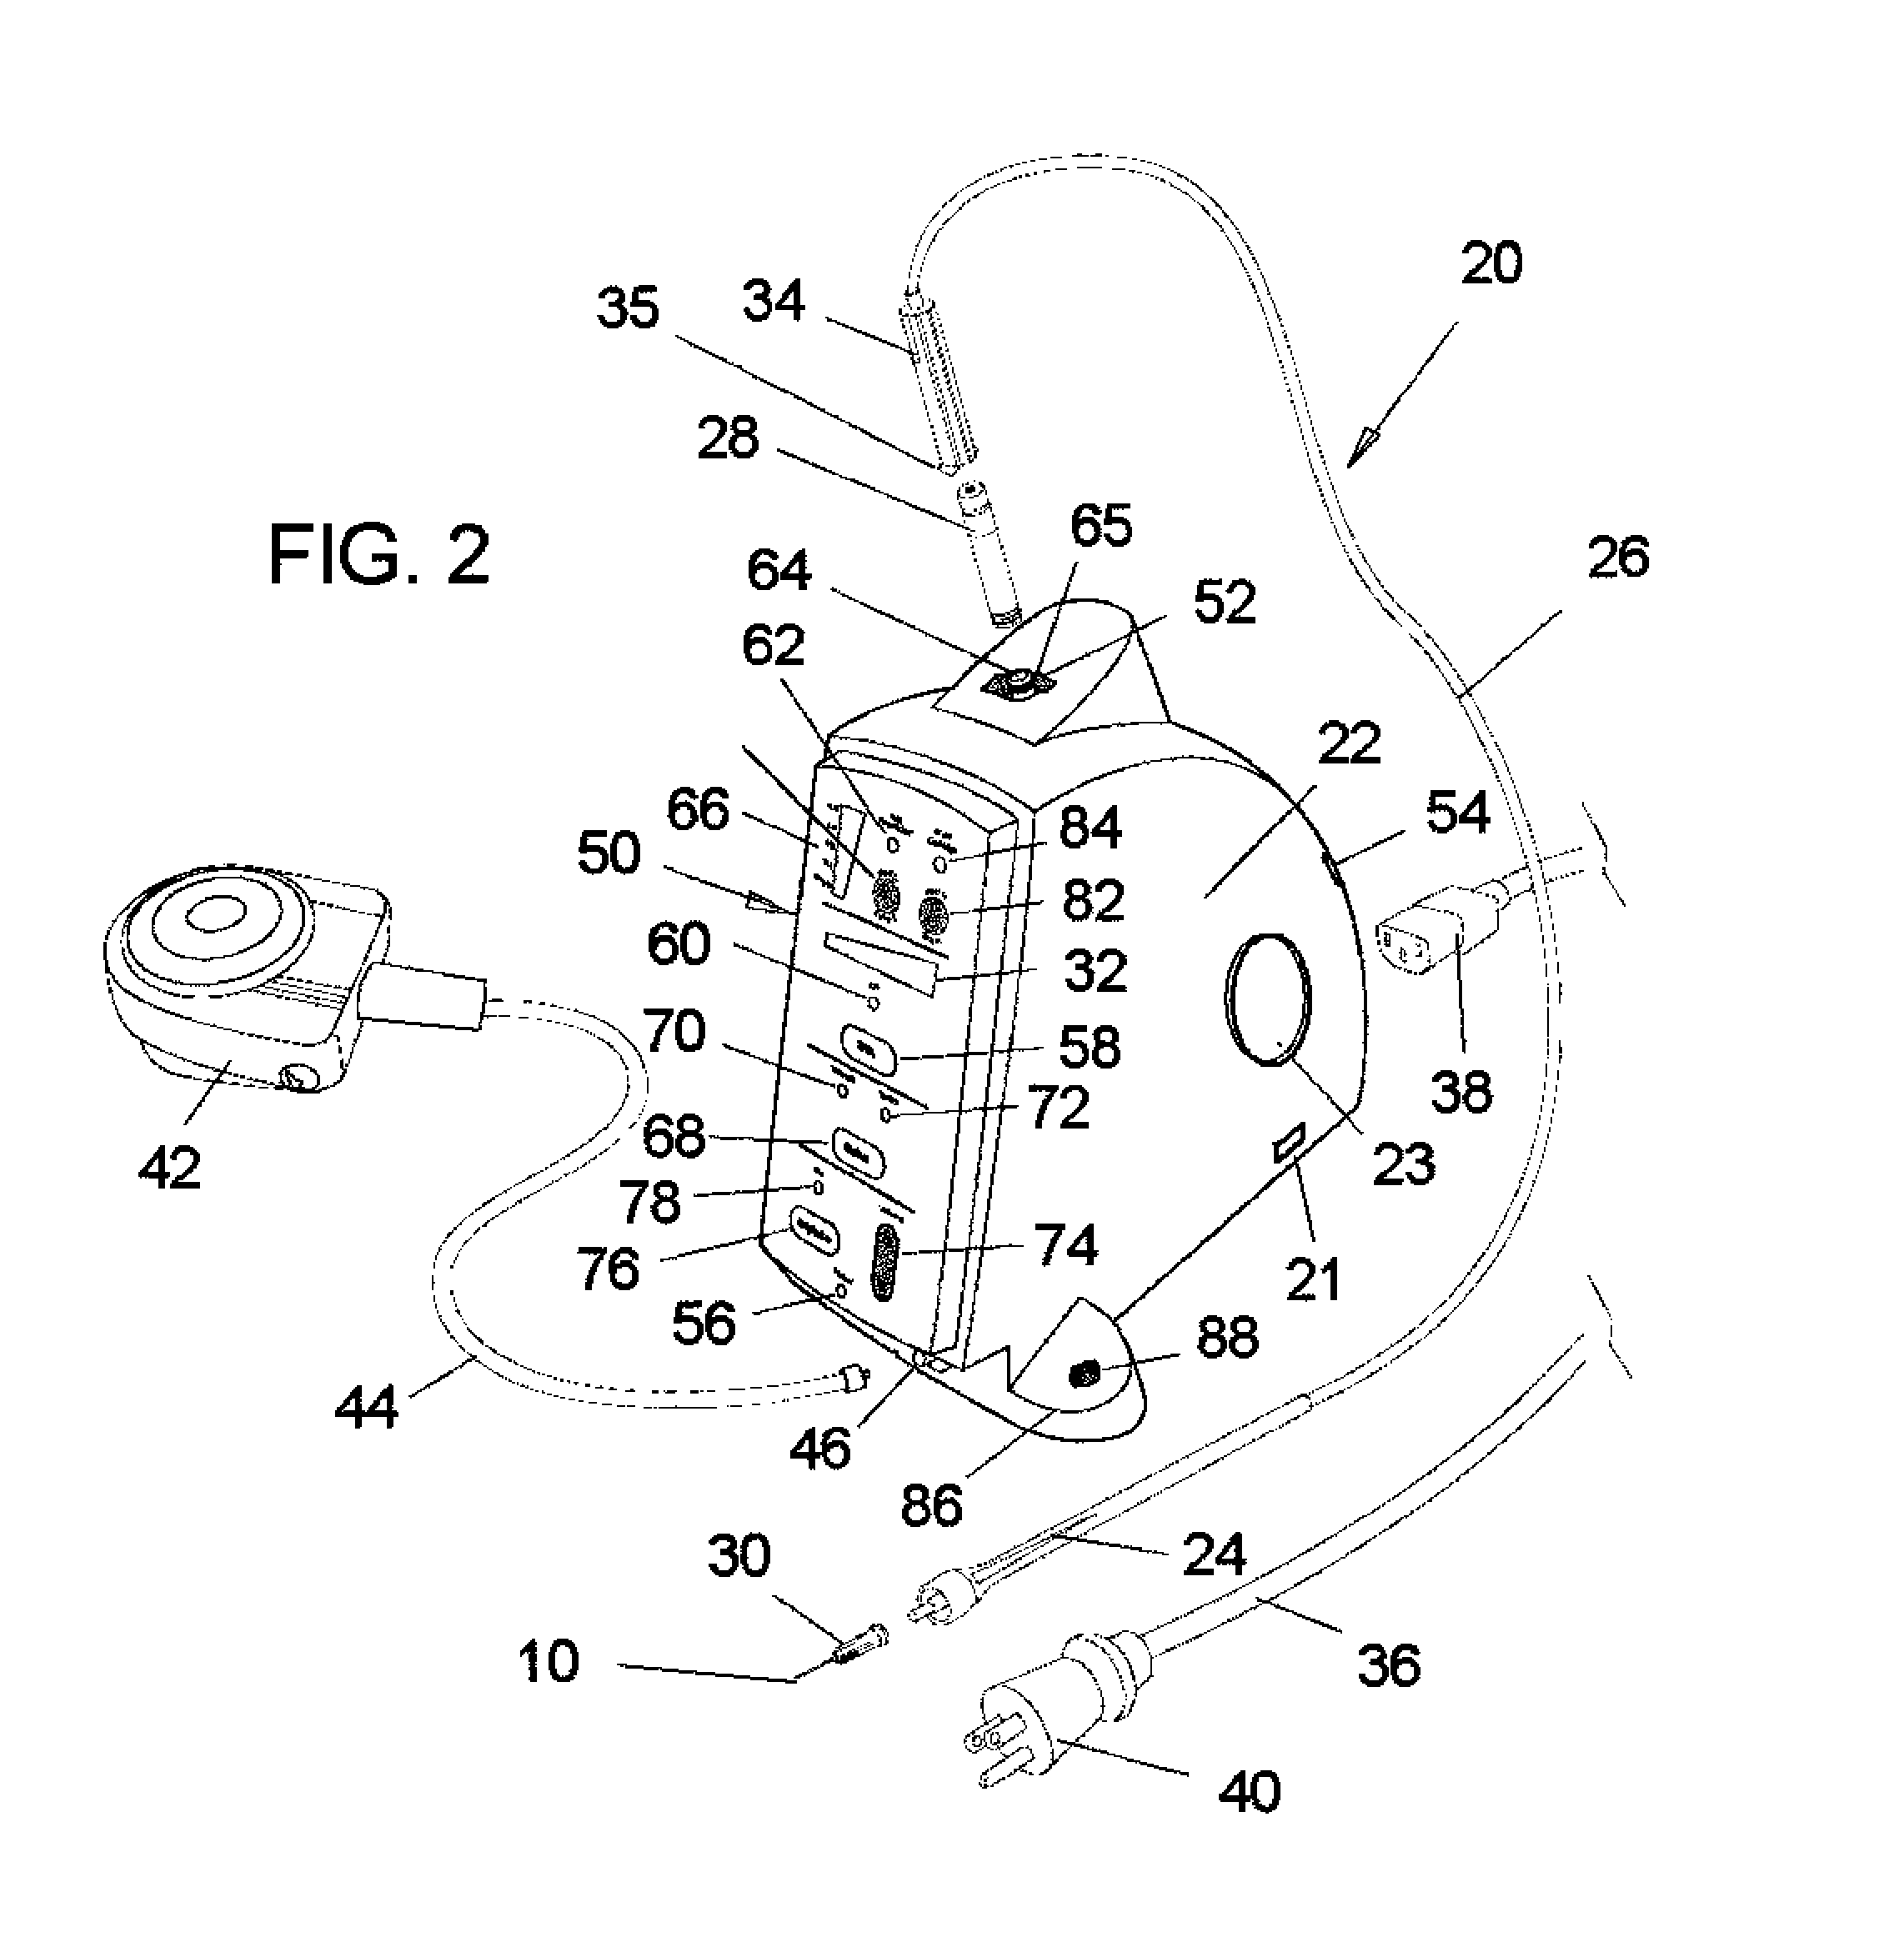 Computer controlled drug delivery system with dynamic pressure sensing